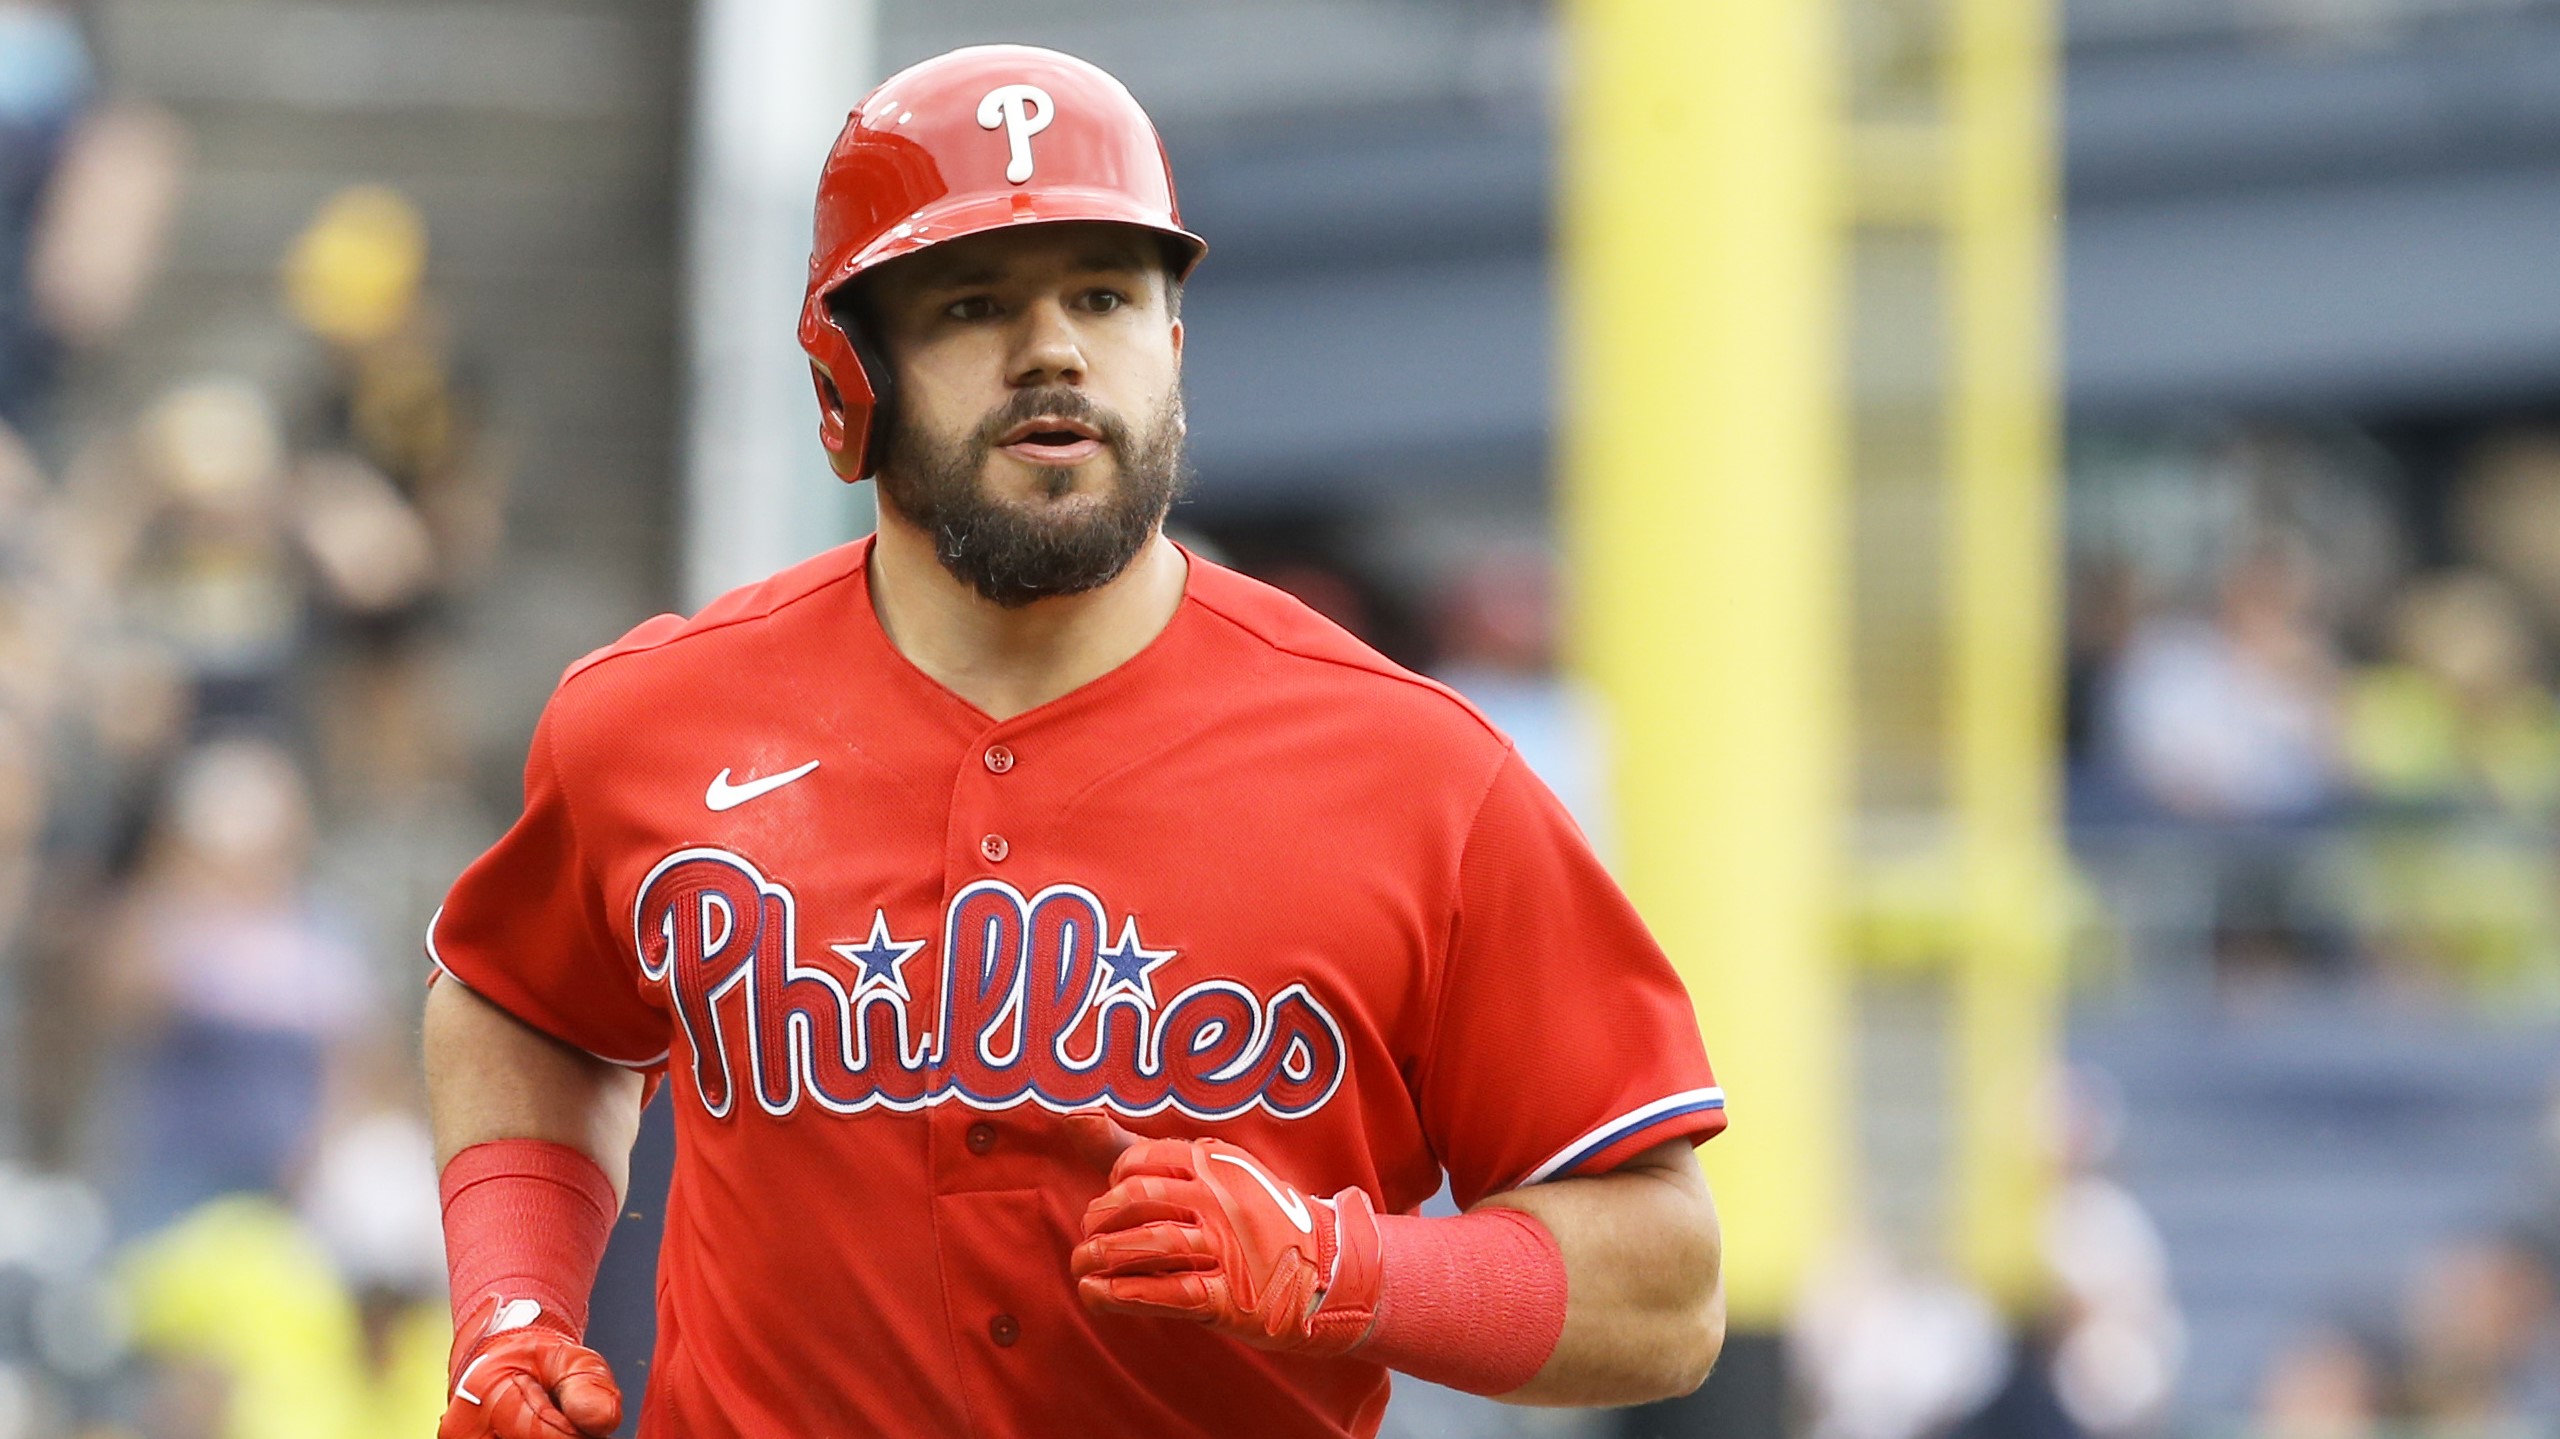 Schwarbombs': Kyle Schwarber Powers Phillies in MLB Playoffs With